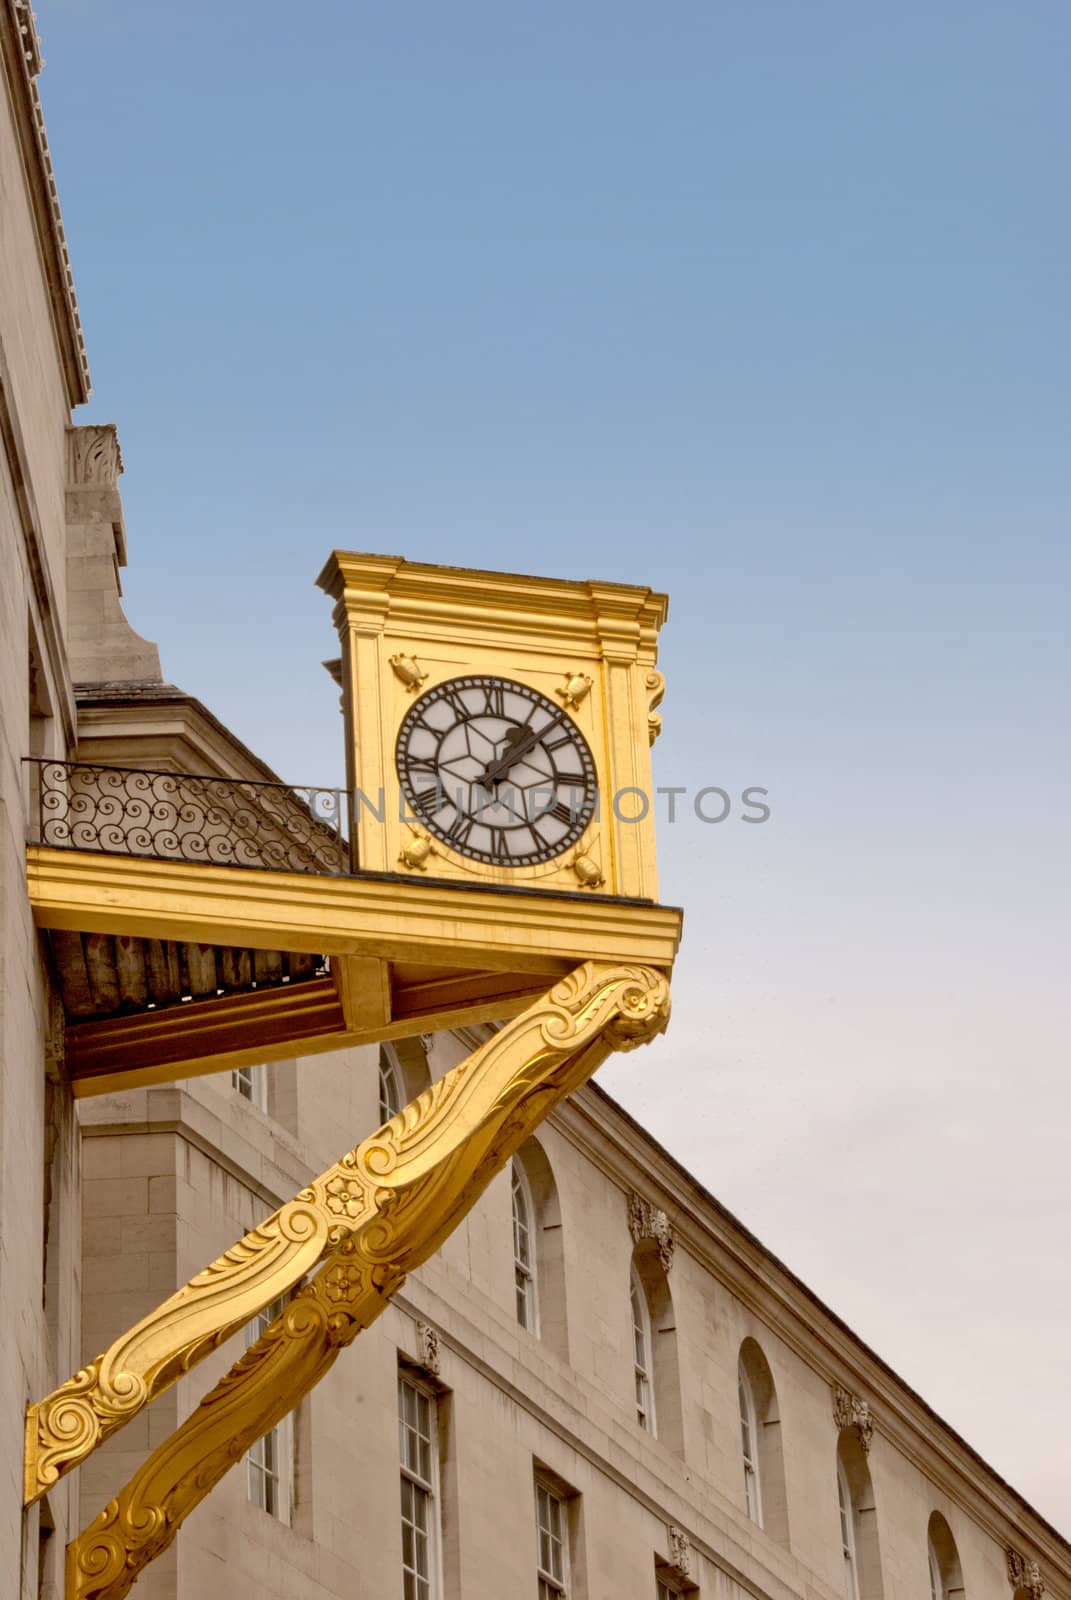 A Gold Coloured Clock on the side of a building in Yorkshire England